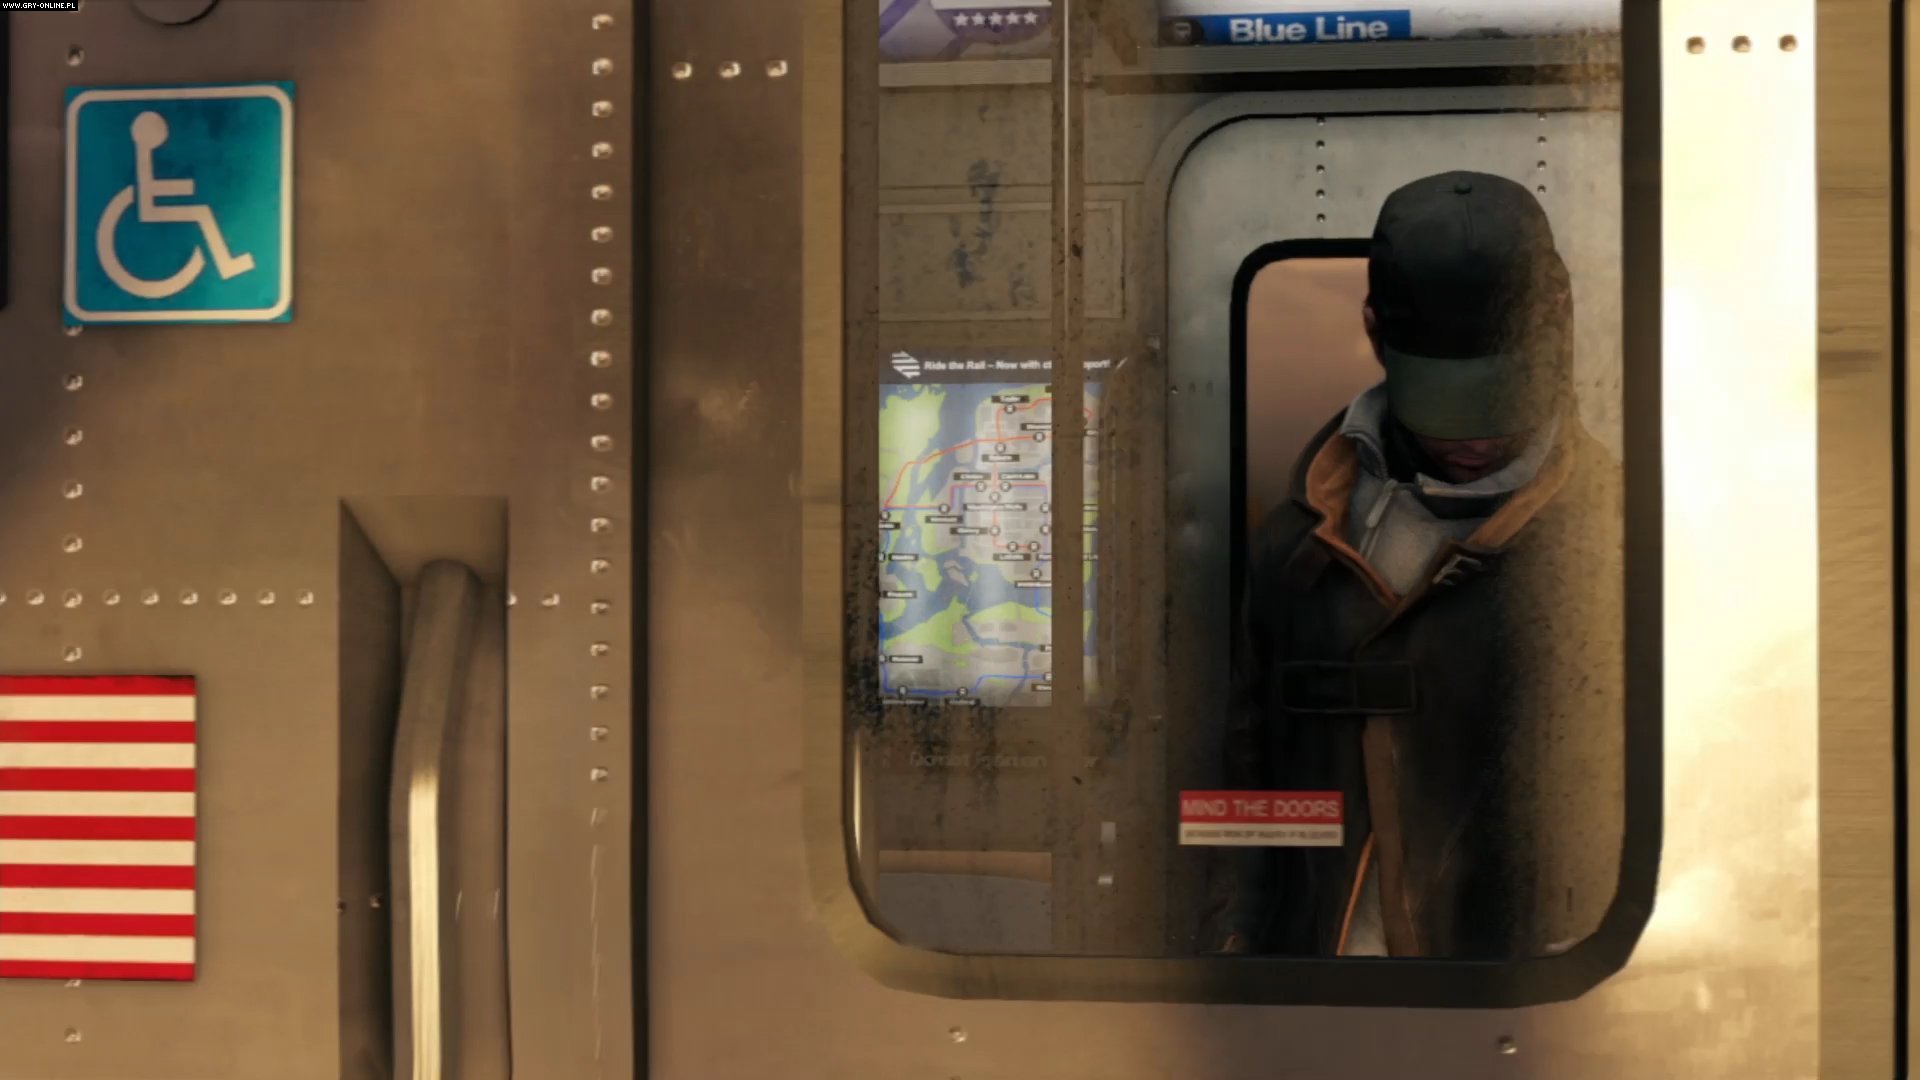 Free download wallpaper Watch Dogs, Video Game, Aiden Pearce on your PC desktop